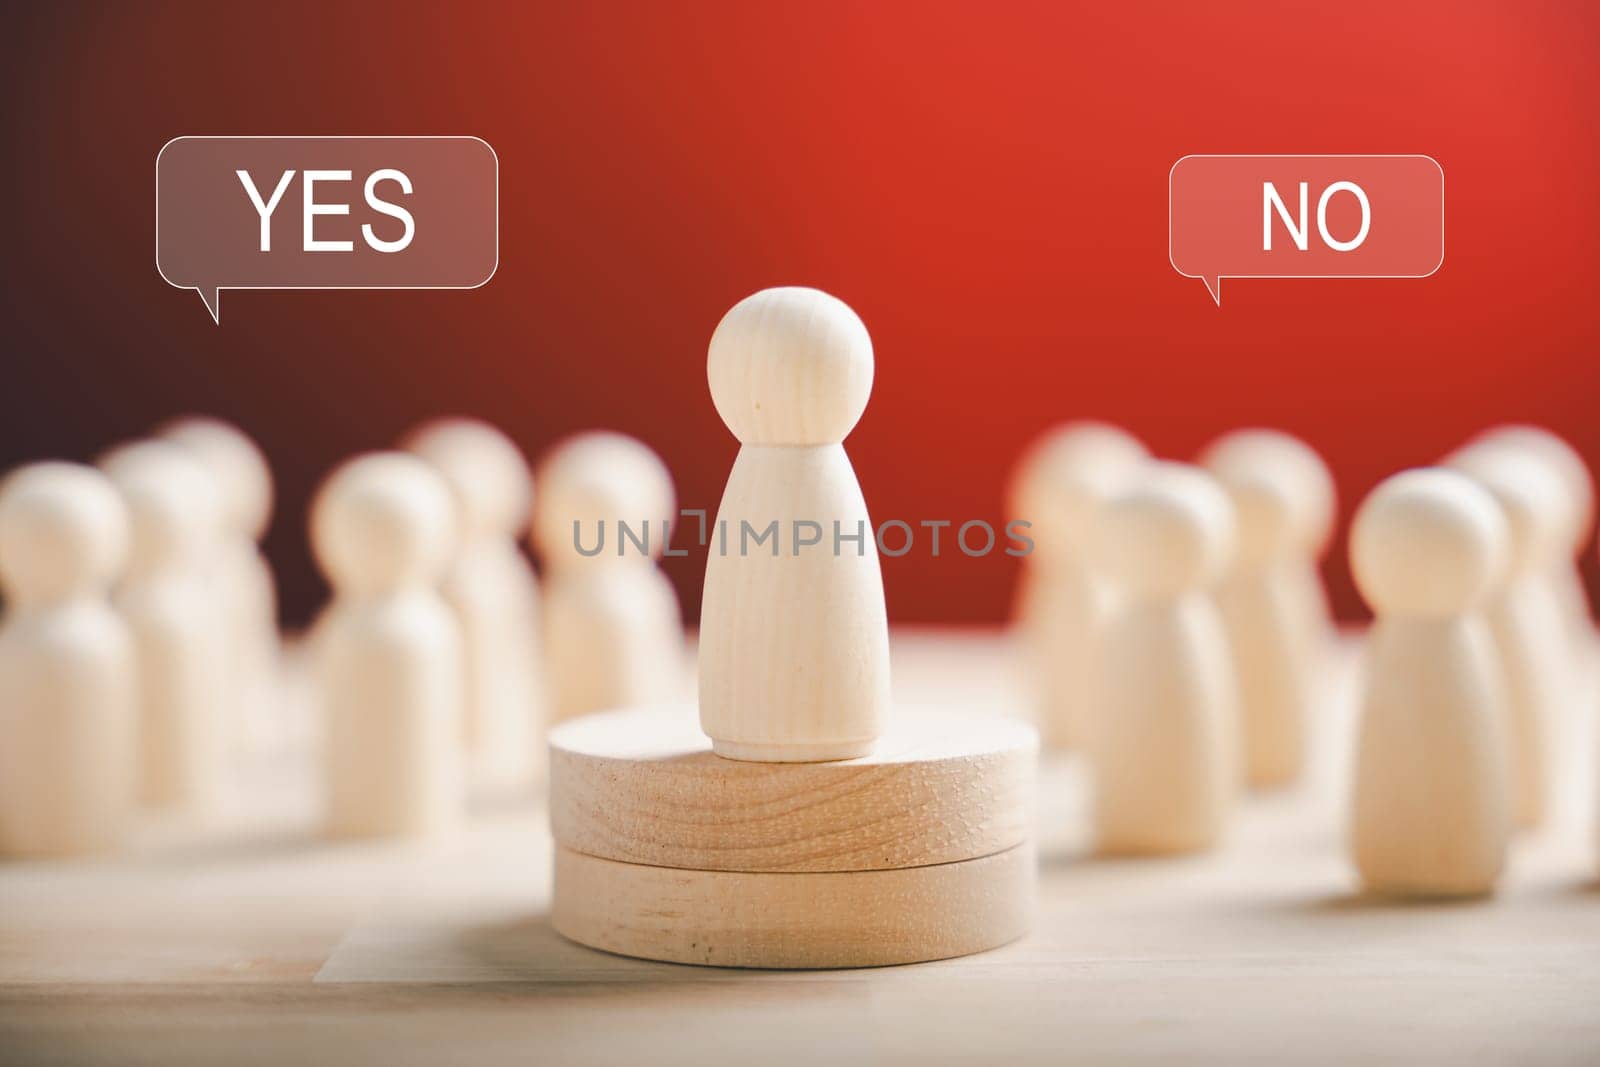 Wooden figures stand on a cube displaying yes or no symbols. Signifying open-mindedness in elections with volunteers and constituency participation. Think With Yes Or No Choice.